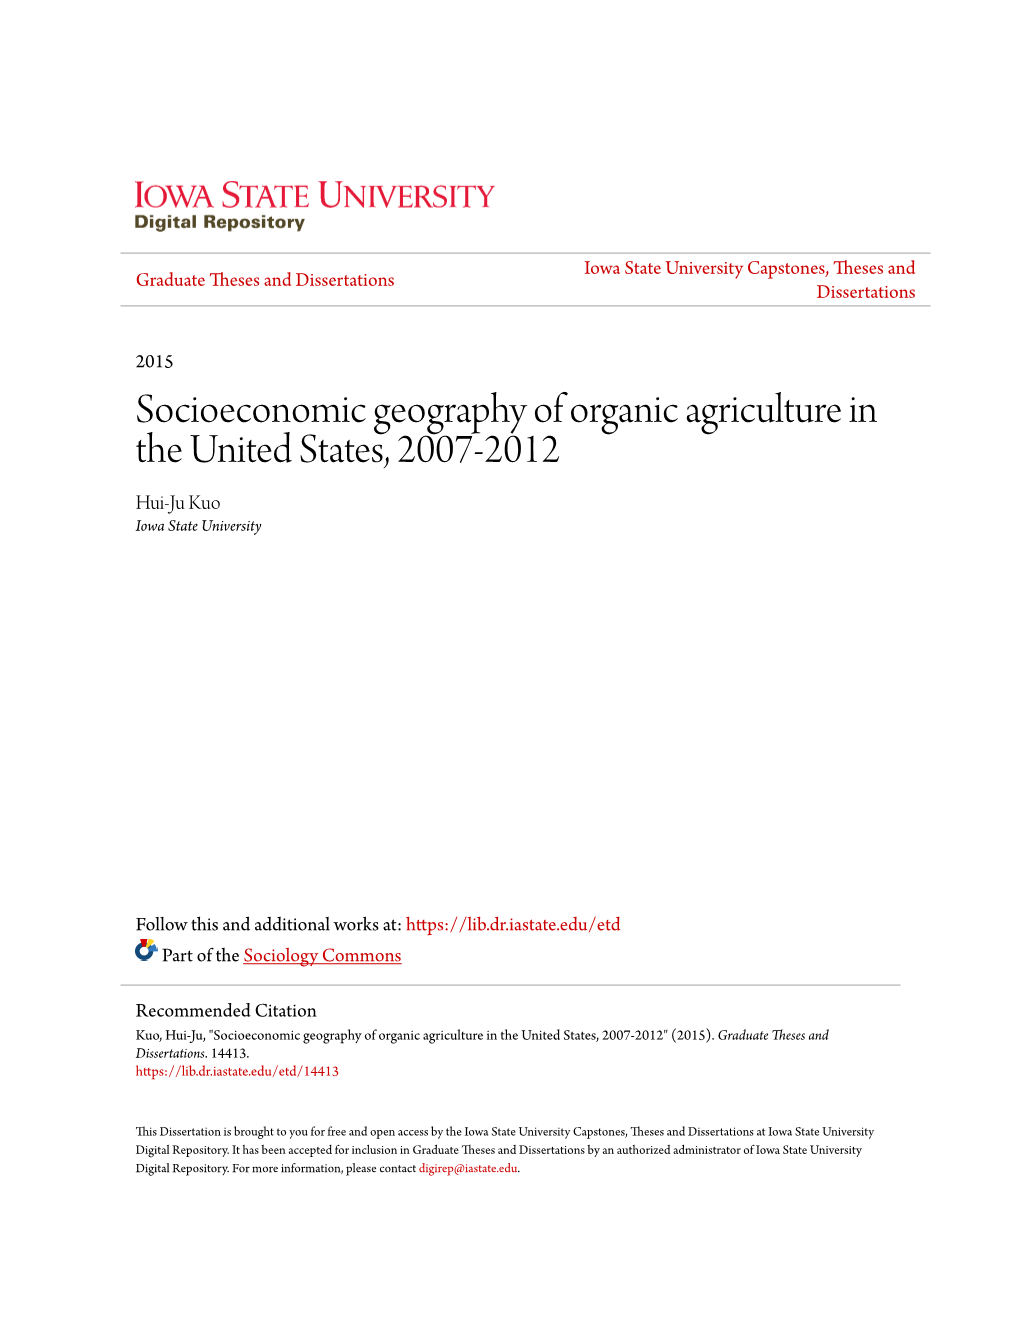 Socioeconomic Geography of Organic Agriculture in the United States, 2007-2012 Hui-Ju Kuo Iowa State University